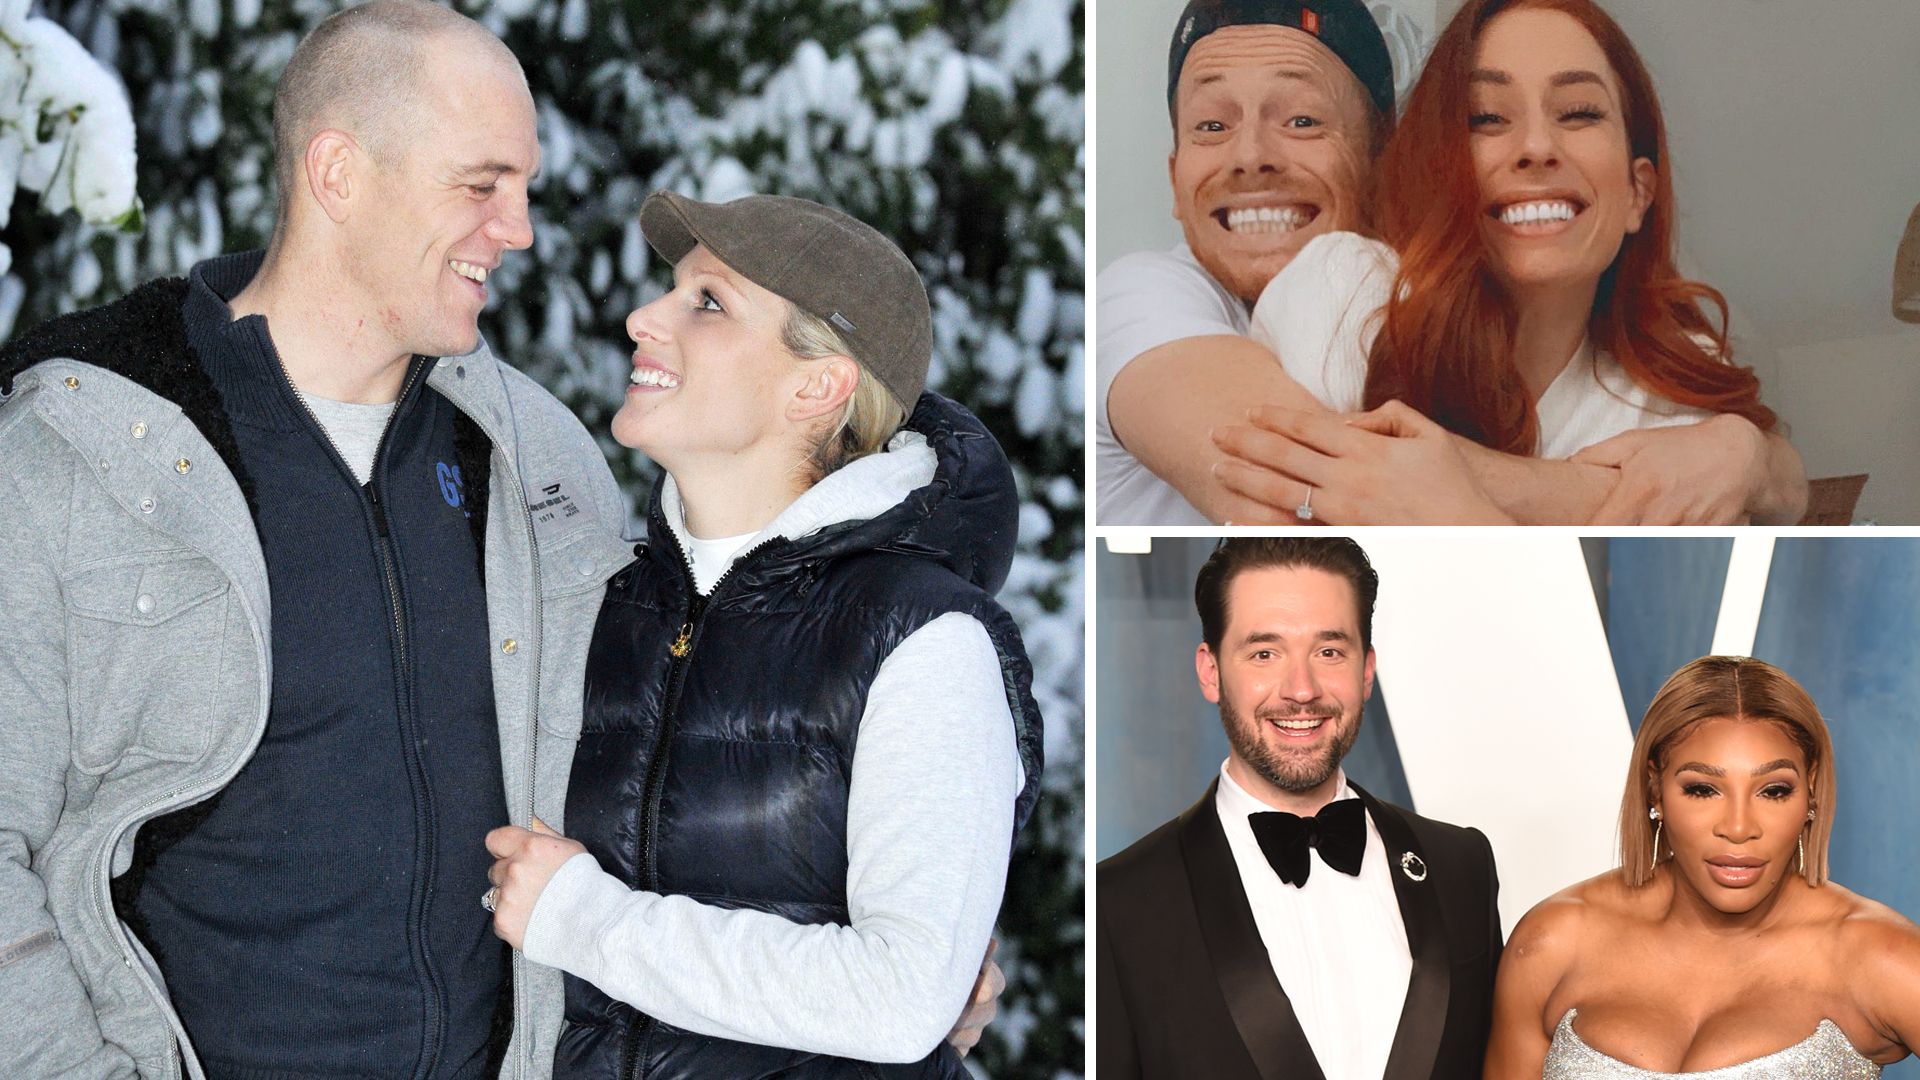 Zara Tindall, Stacey Solomon, Serena Williams and more who got engaged over Christmas